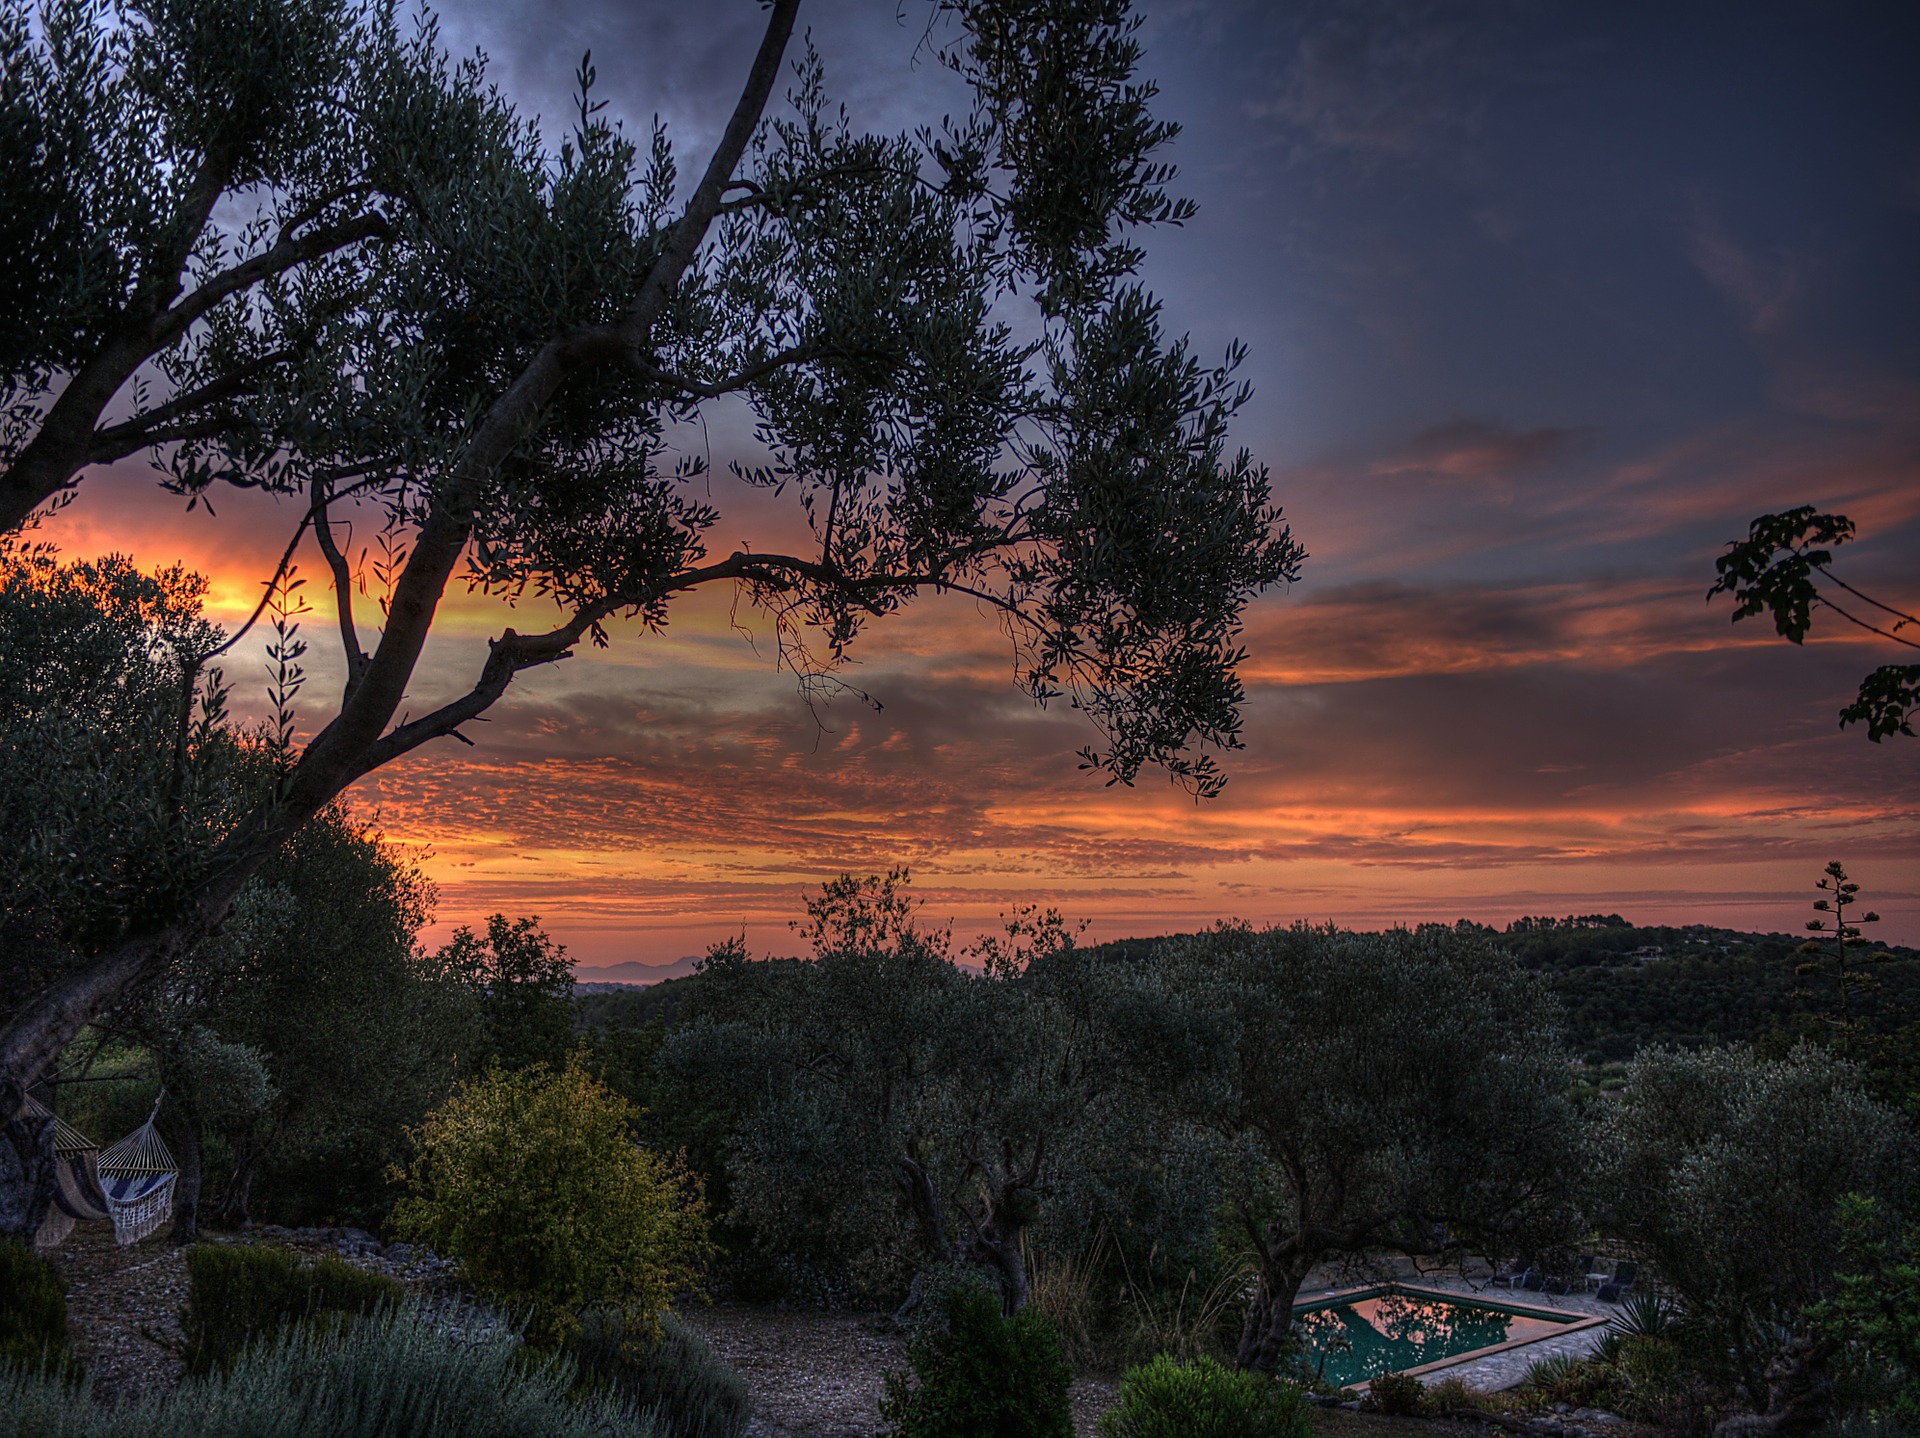 Mallorca: the best place to photograph sunrises and sunsets